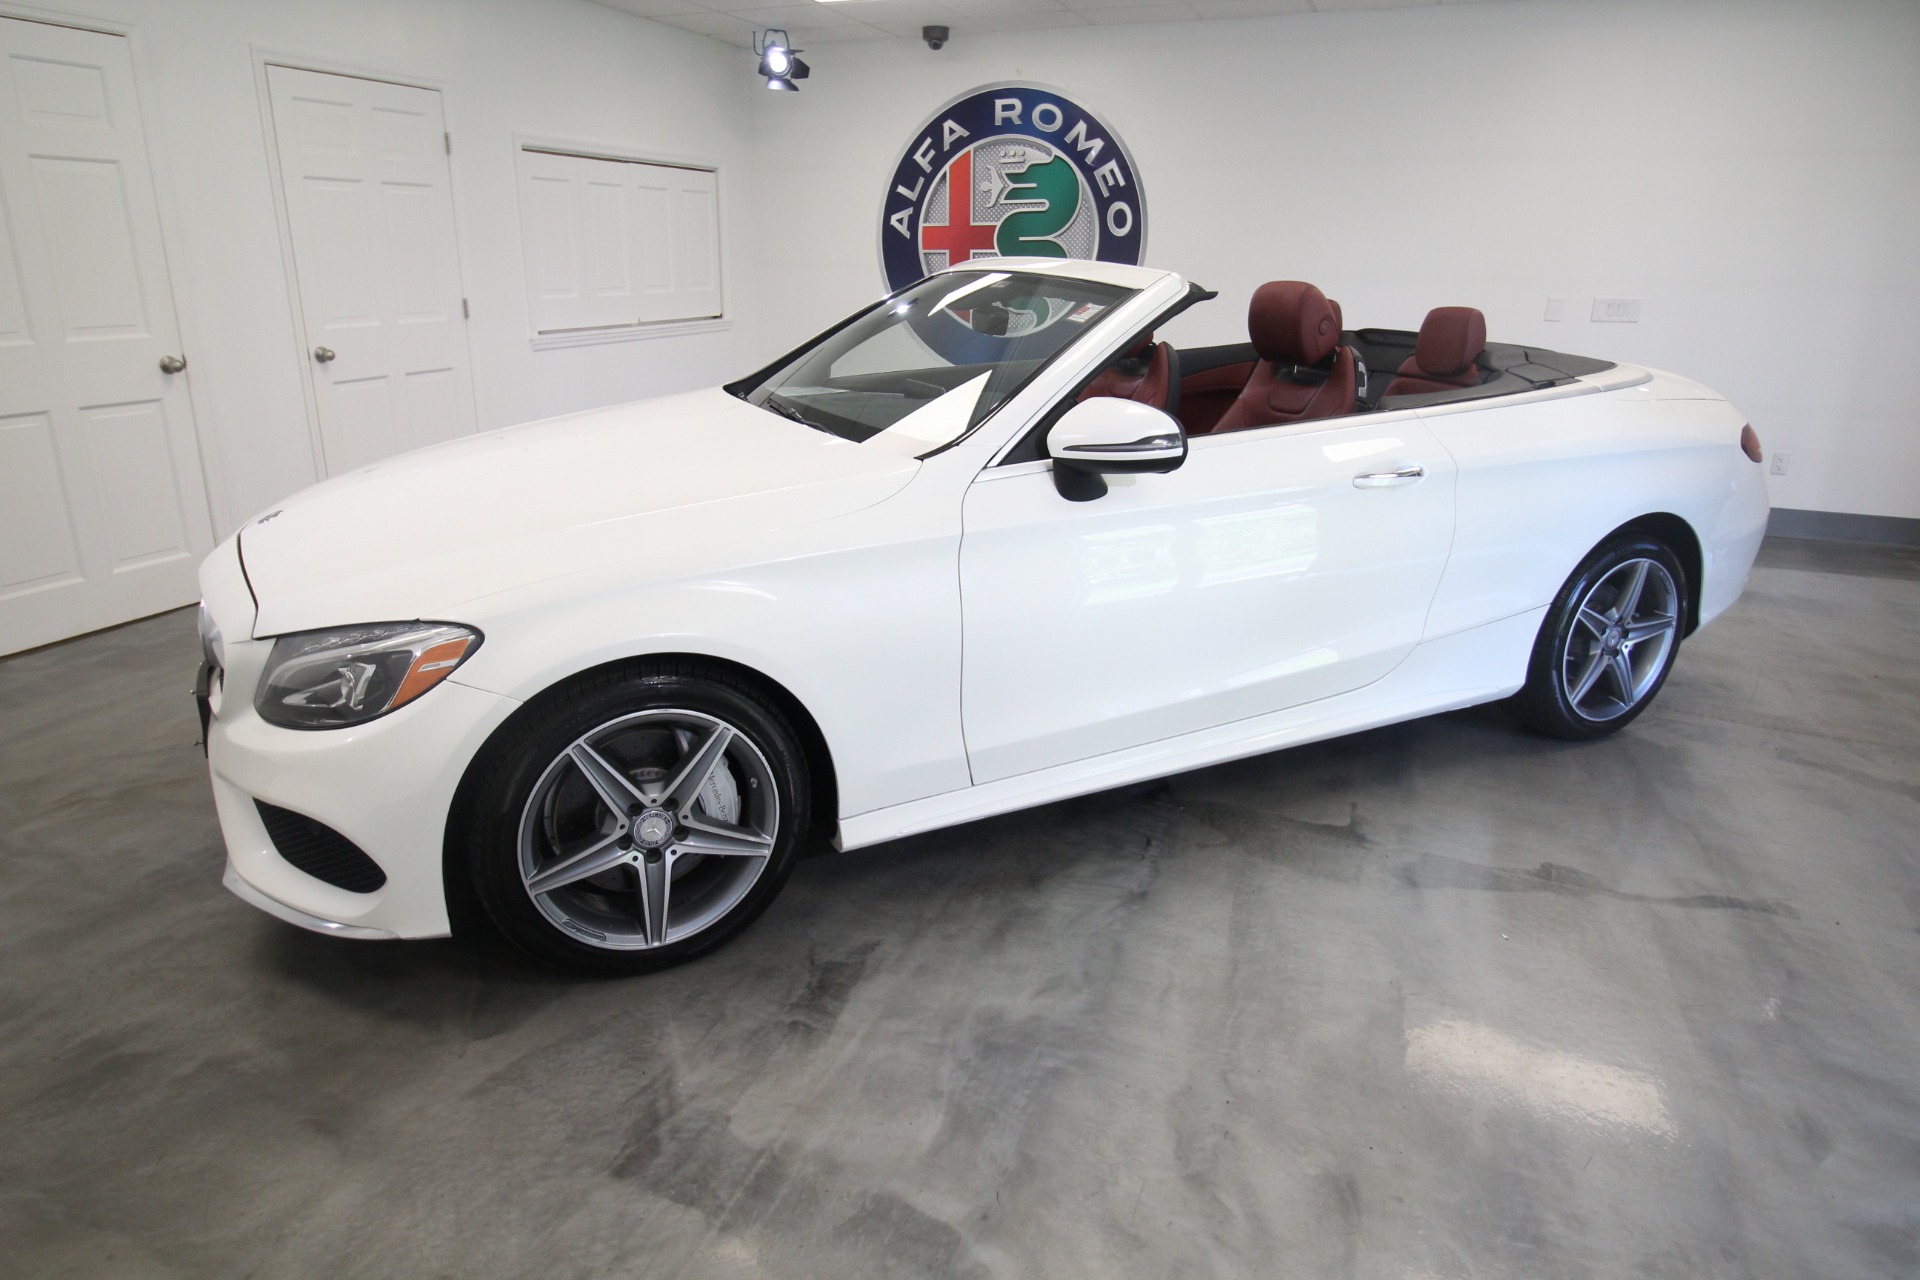 Used 2017 Polar White Mercedes-Benz C-Class C300 4MATIC CONVERTIBLE | Albany, NY